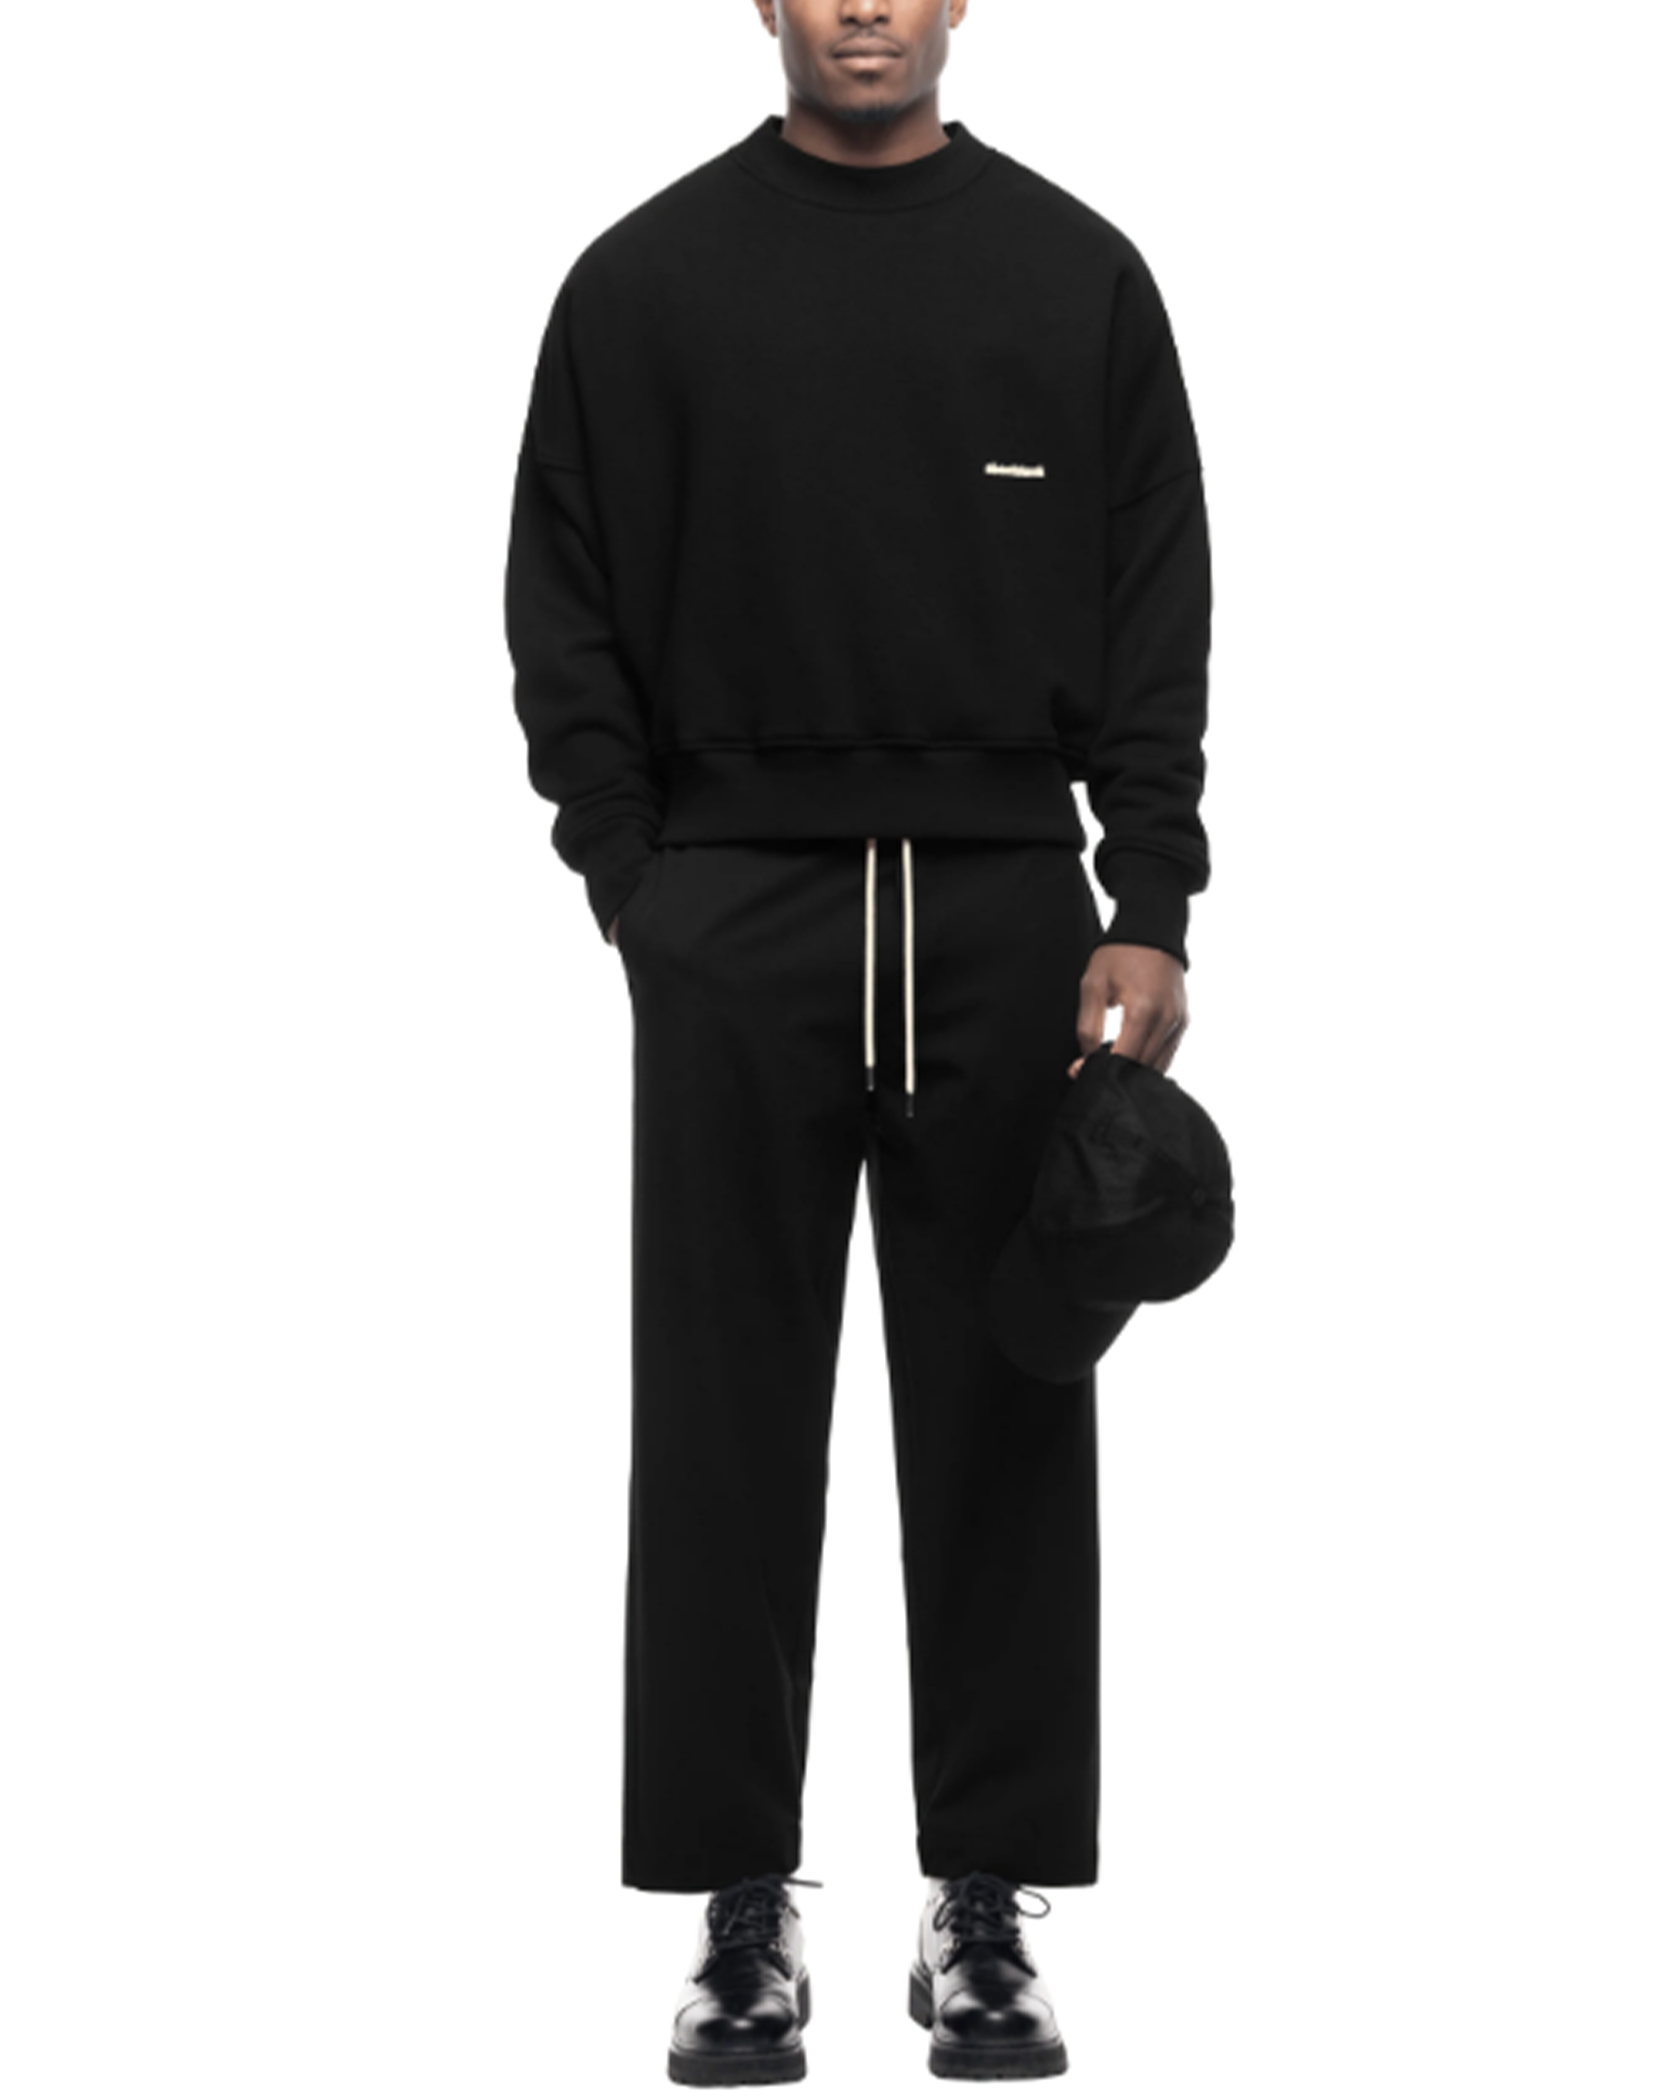 About blank - cropped trousers black